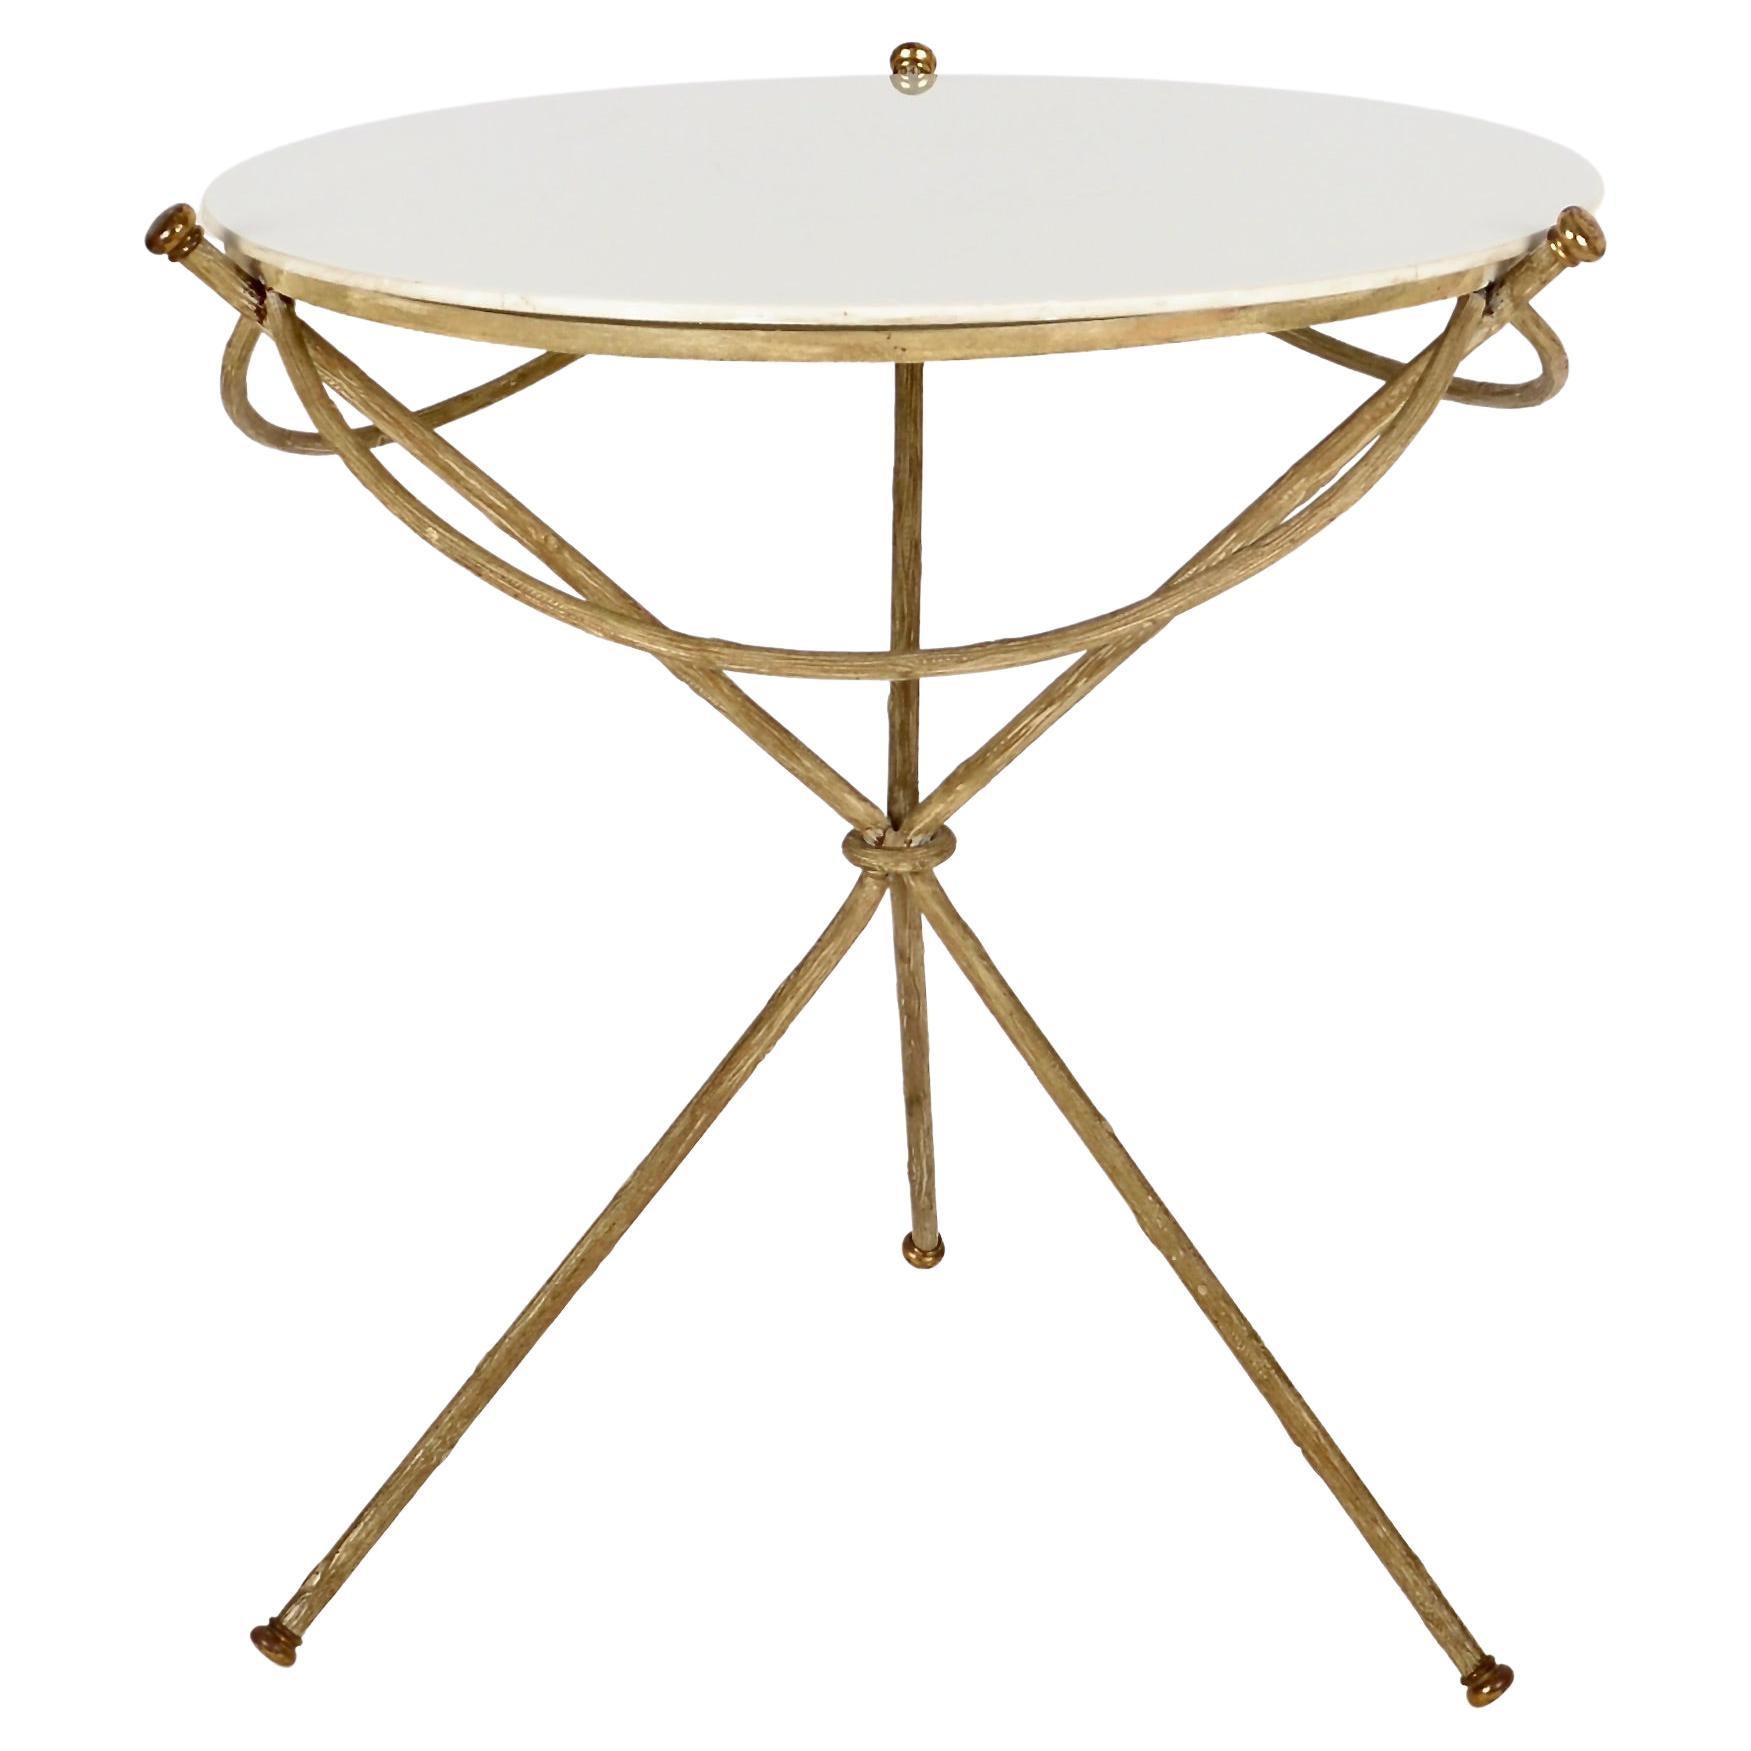 Faux Bois Patterned Metal Table with French Milk Glass Top